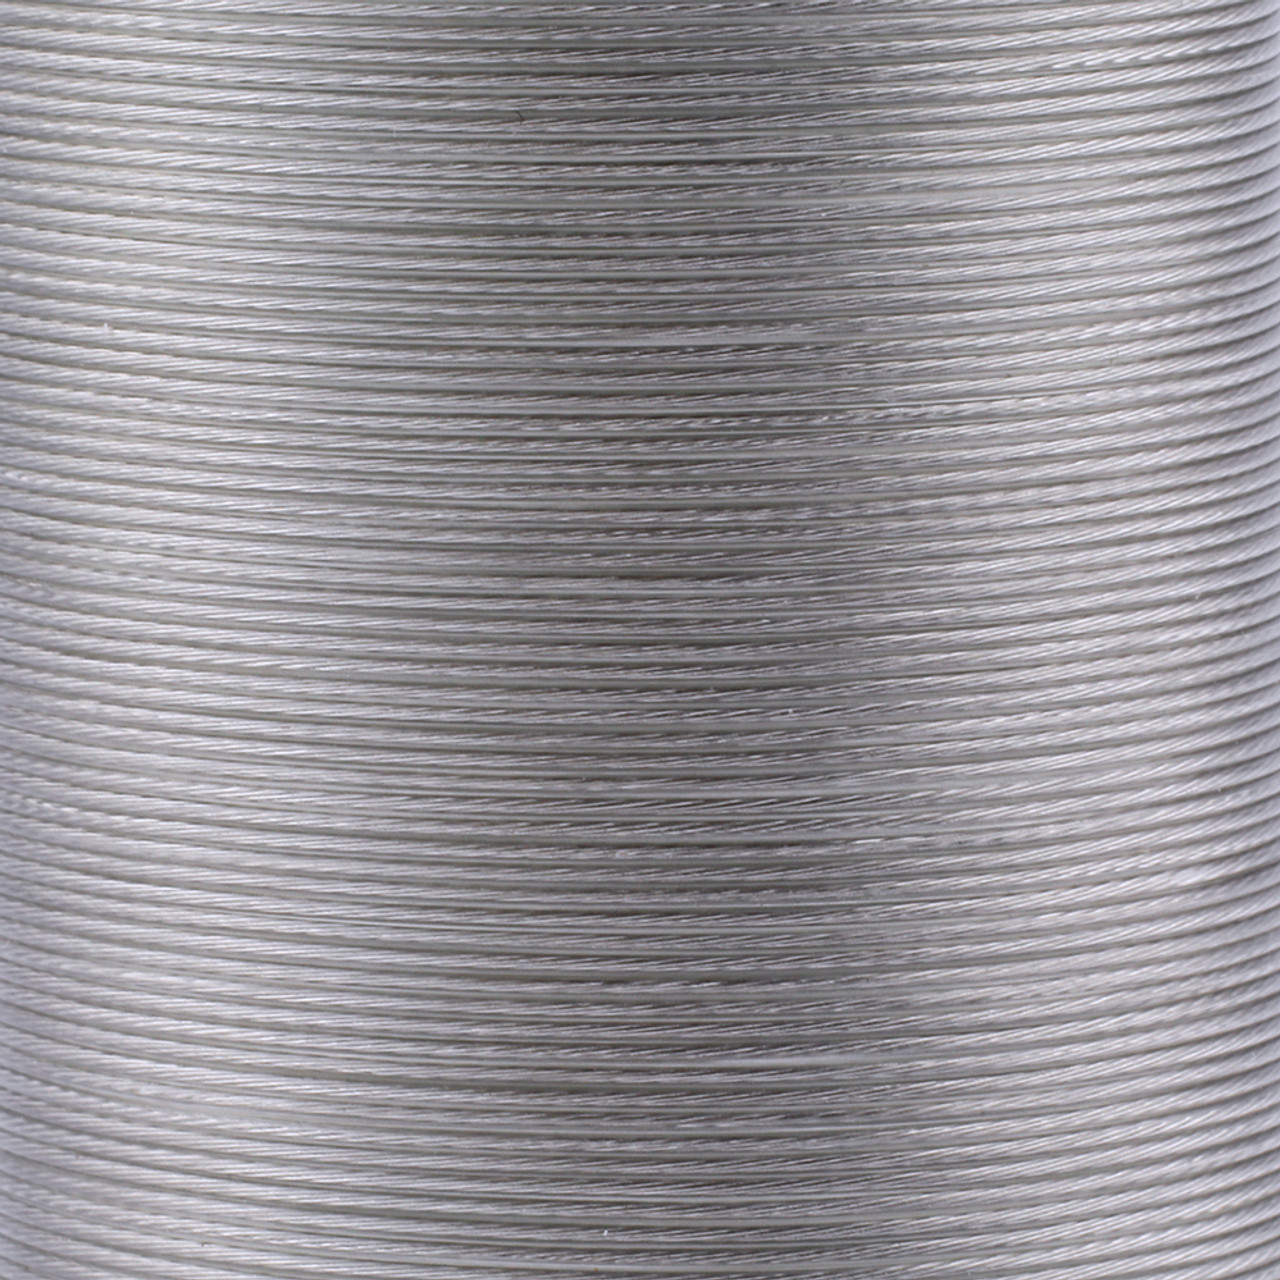 Beading wire, Tigertail™, nylon-coated stainless steel, clear, 7 strand,  0.012-inch diameter. Sold per 100-foot spool. - Fire Mountain Gems and Beads